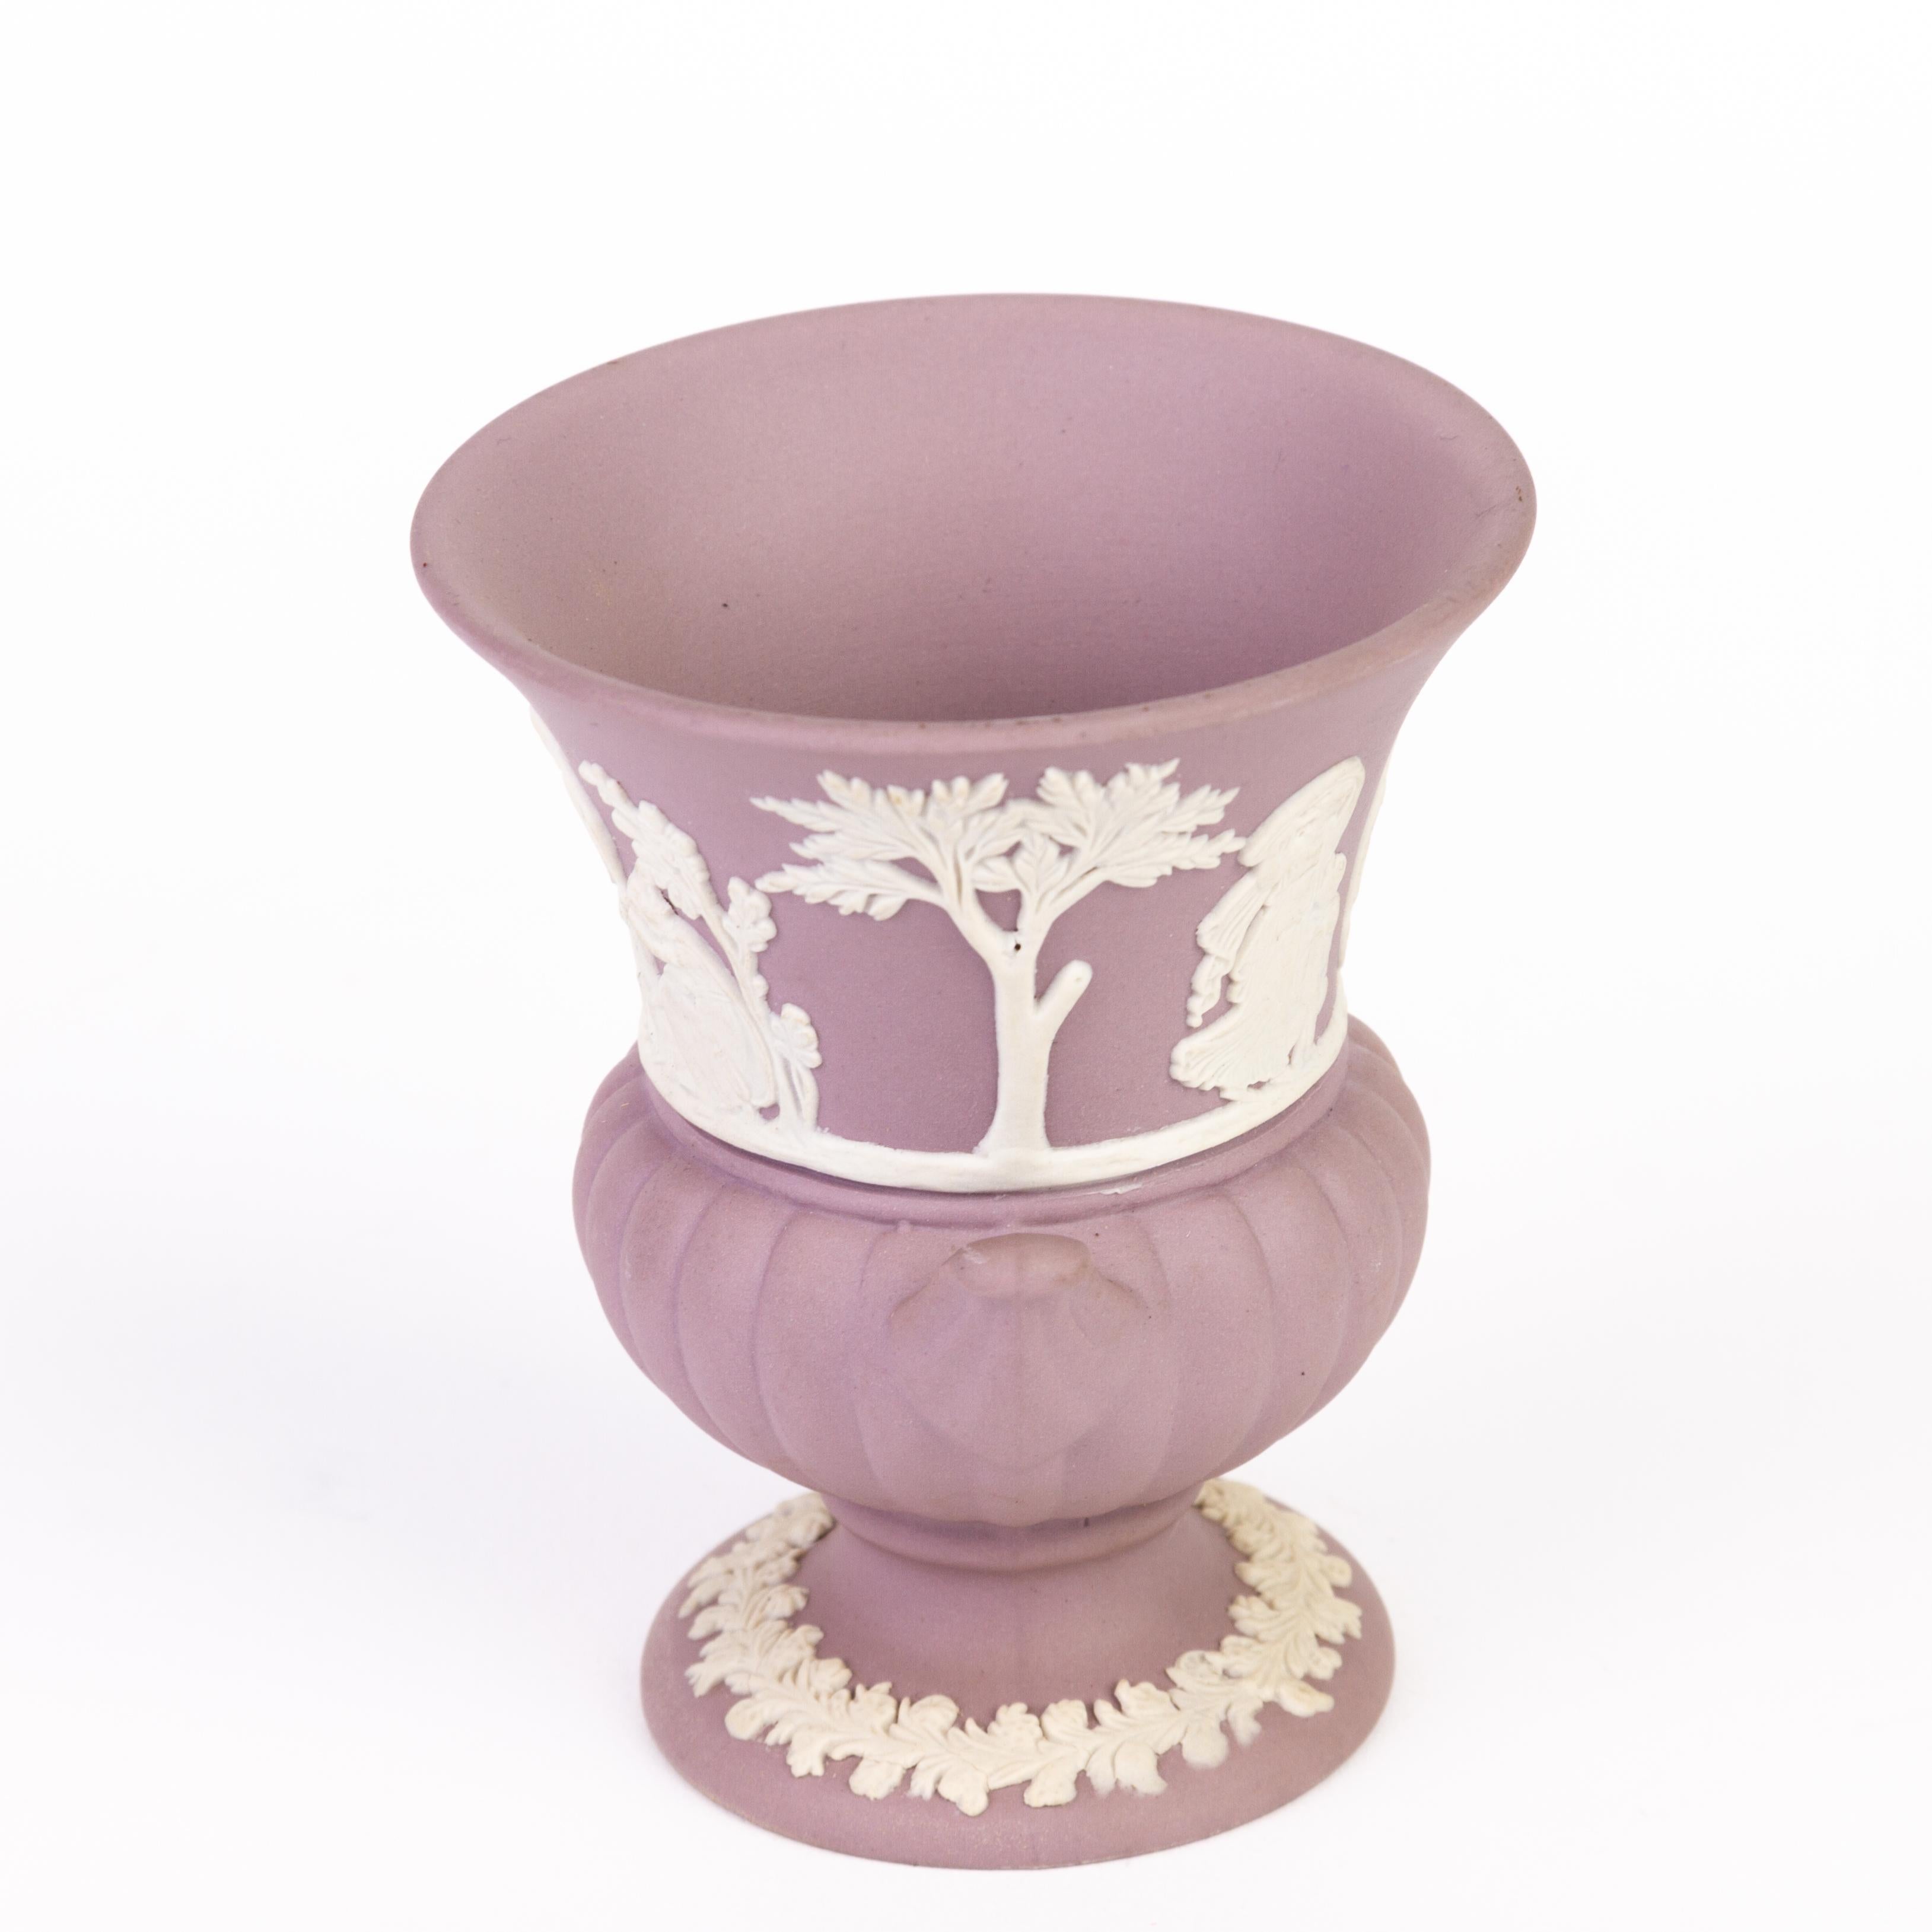 From a private collection.
Free international shipping.
Wedgwood Lilac Jasperware Neoclassical Urn Vase 